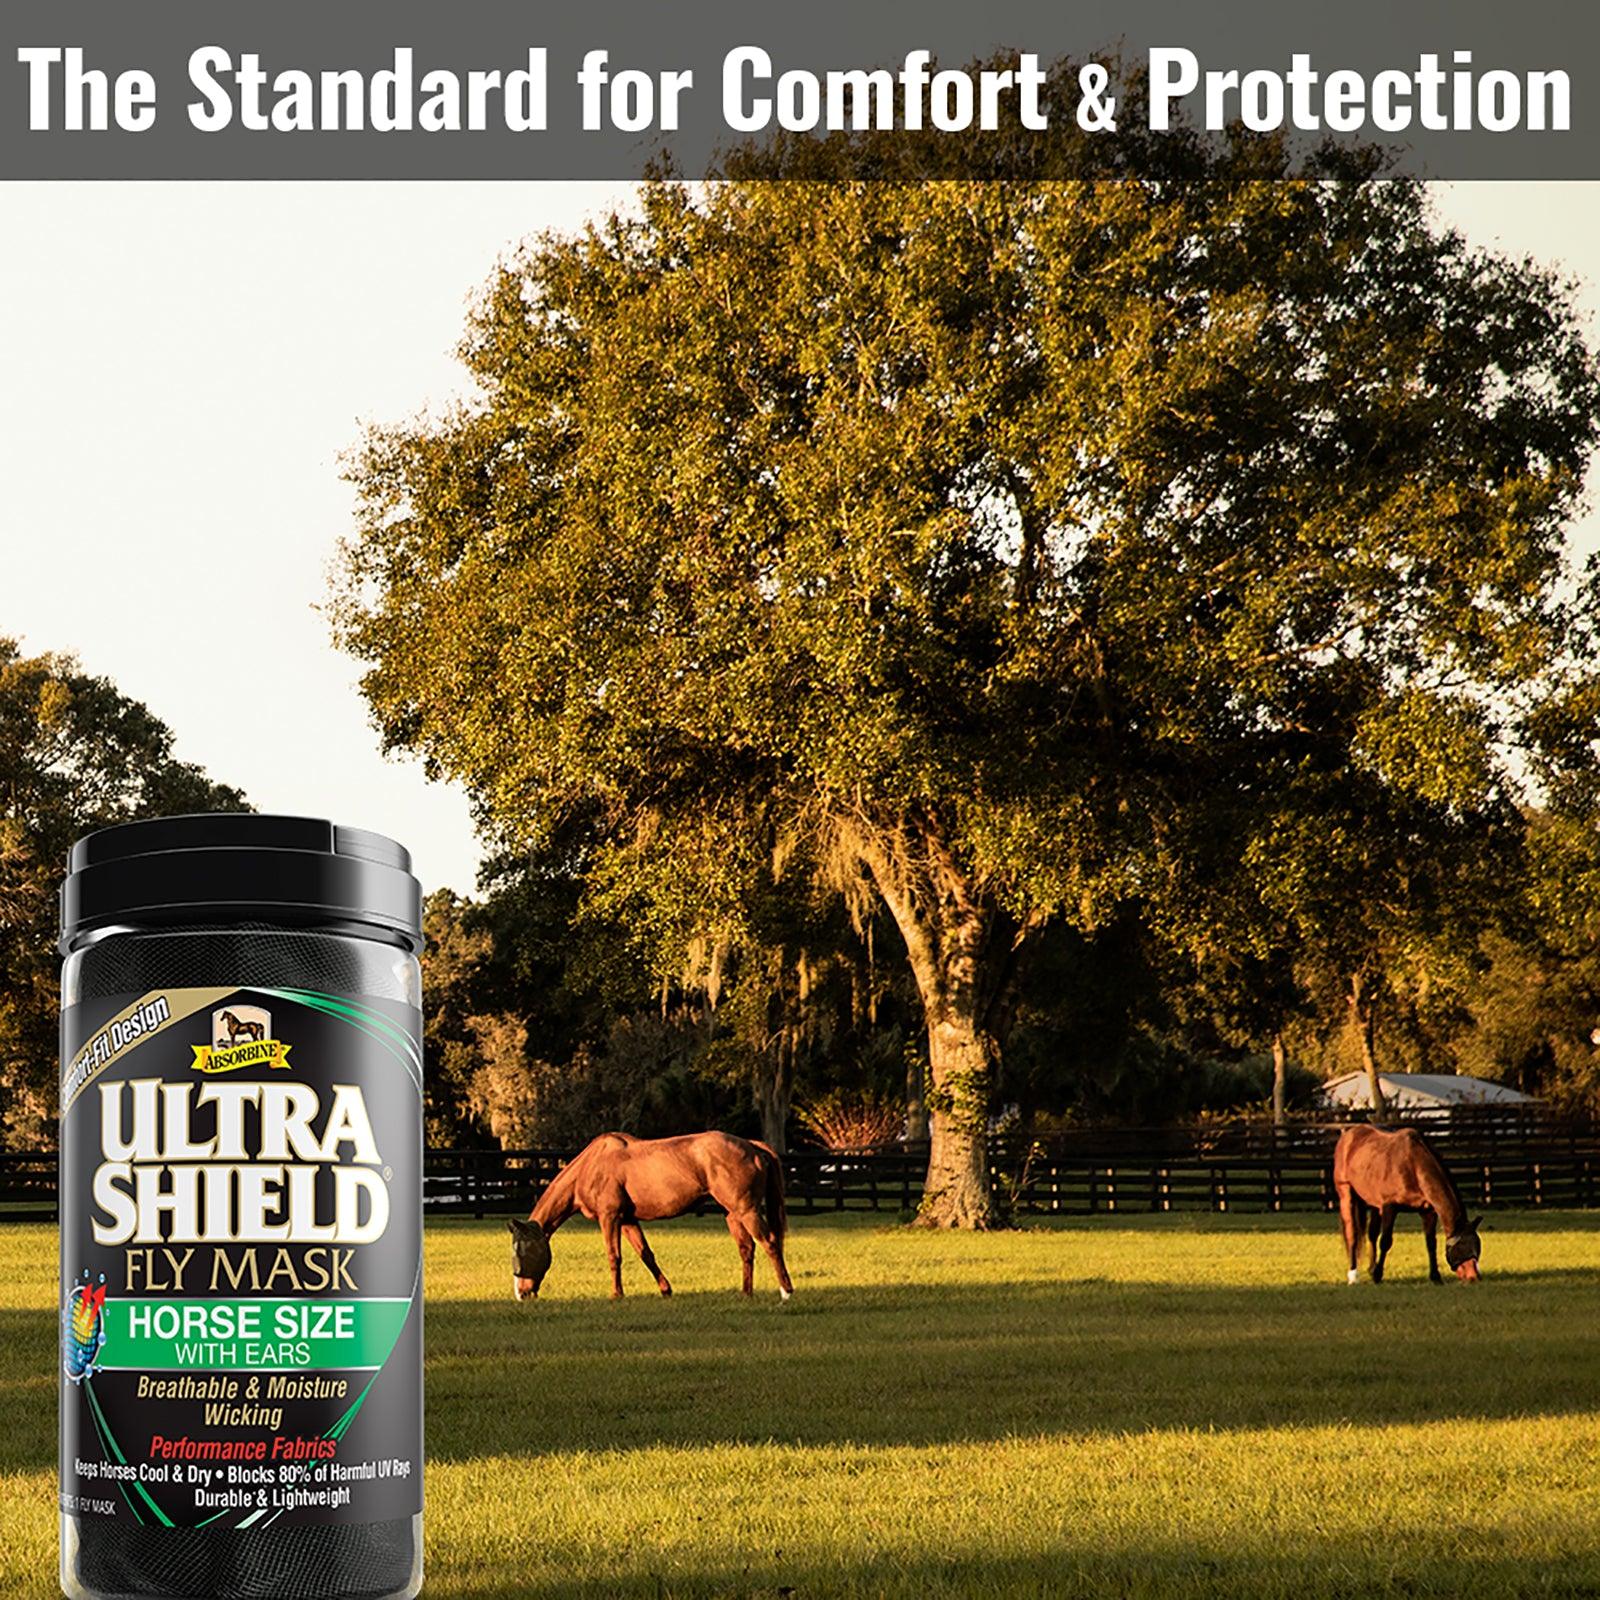 Two horses wearing fly masks in a green field with a beach tree and horse coral in the backdrop.  UltraShield fly masks, the standard for comfort & protection.